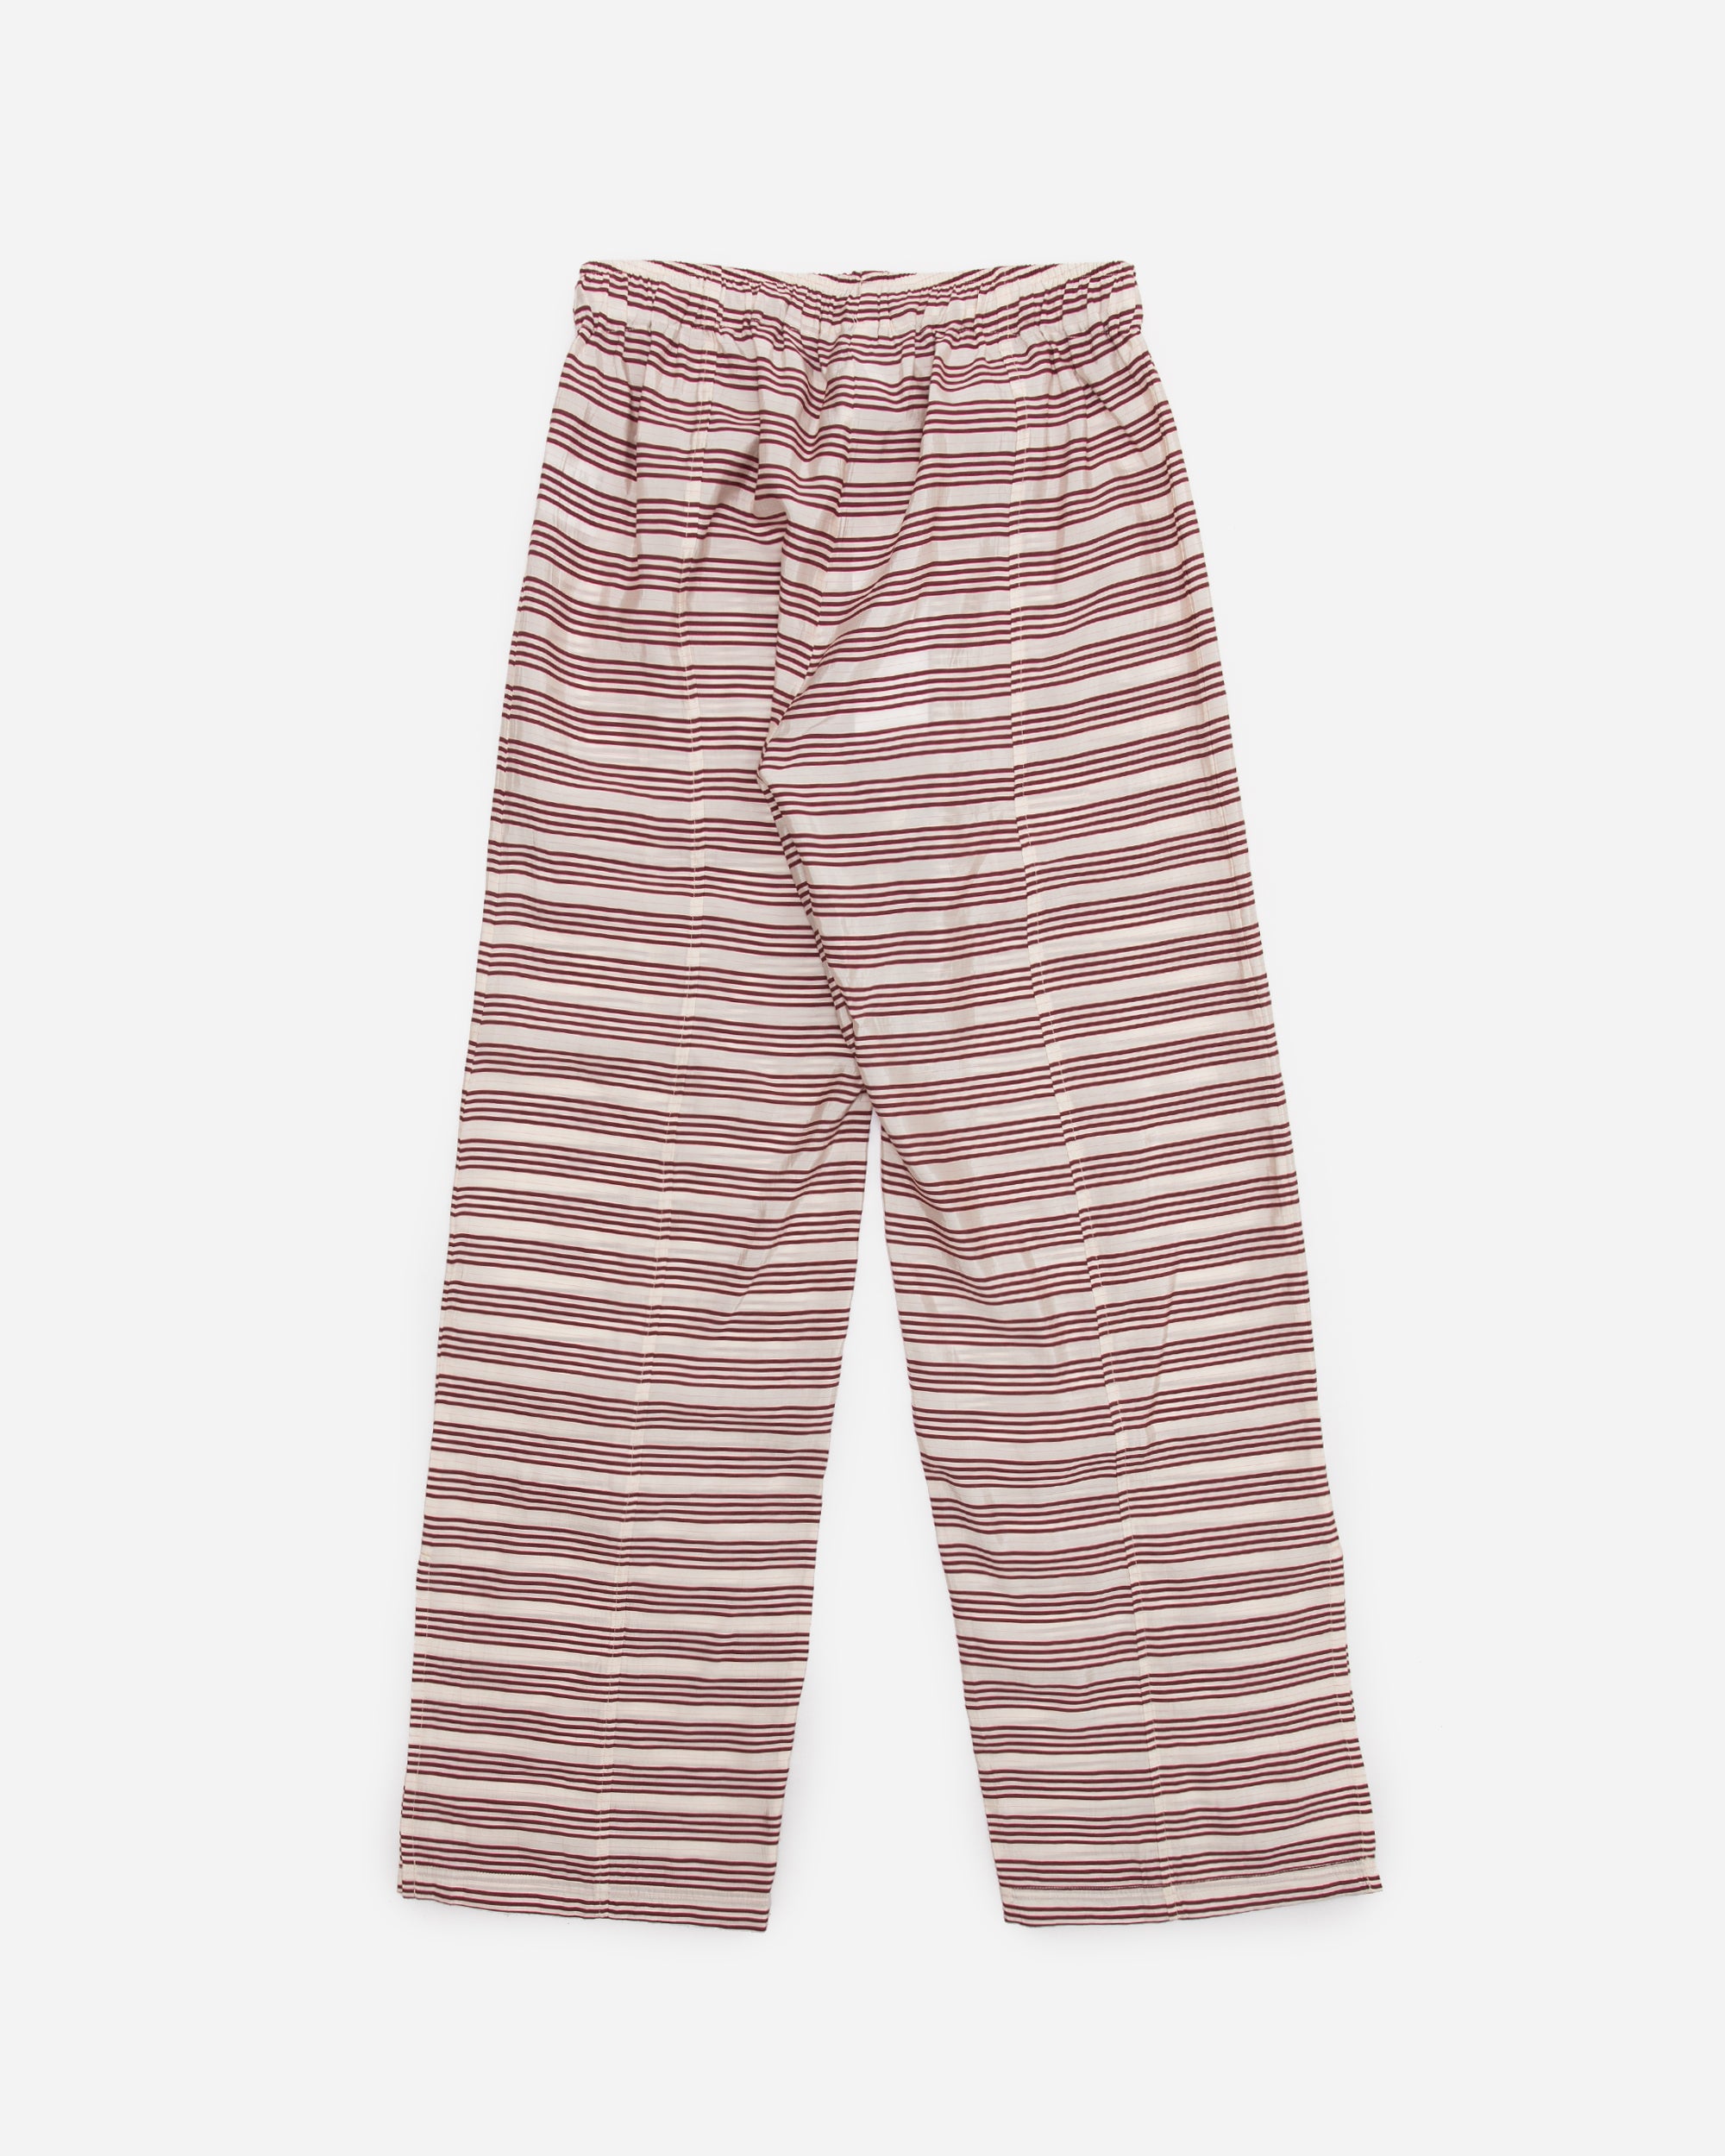 SOULLAND Cilra Pants White/Red Stripes 21173-1188